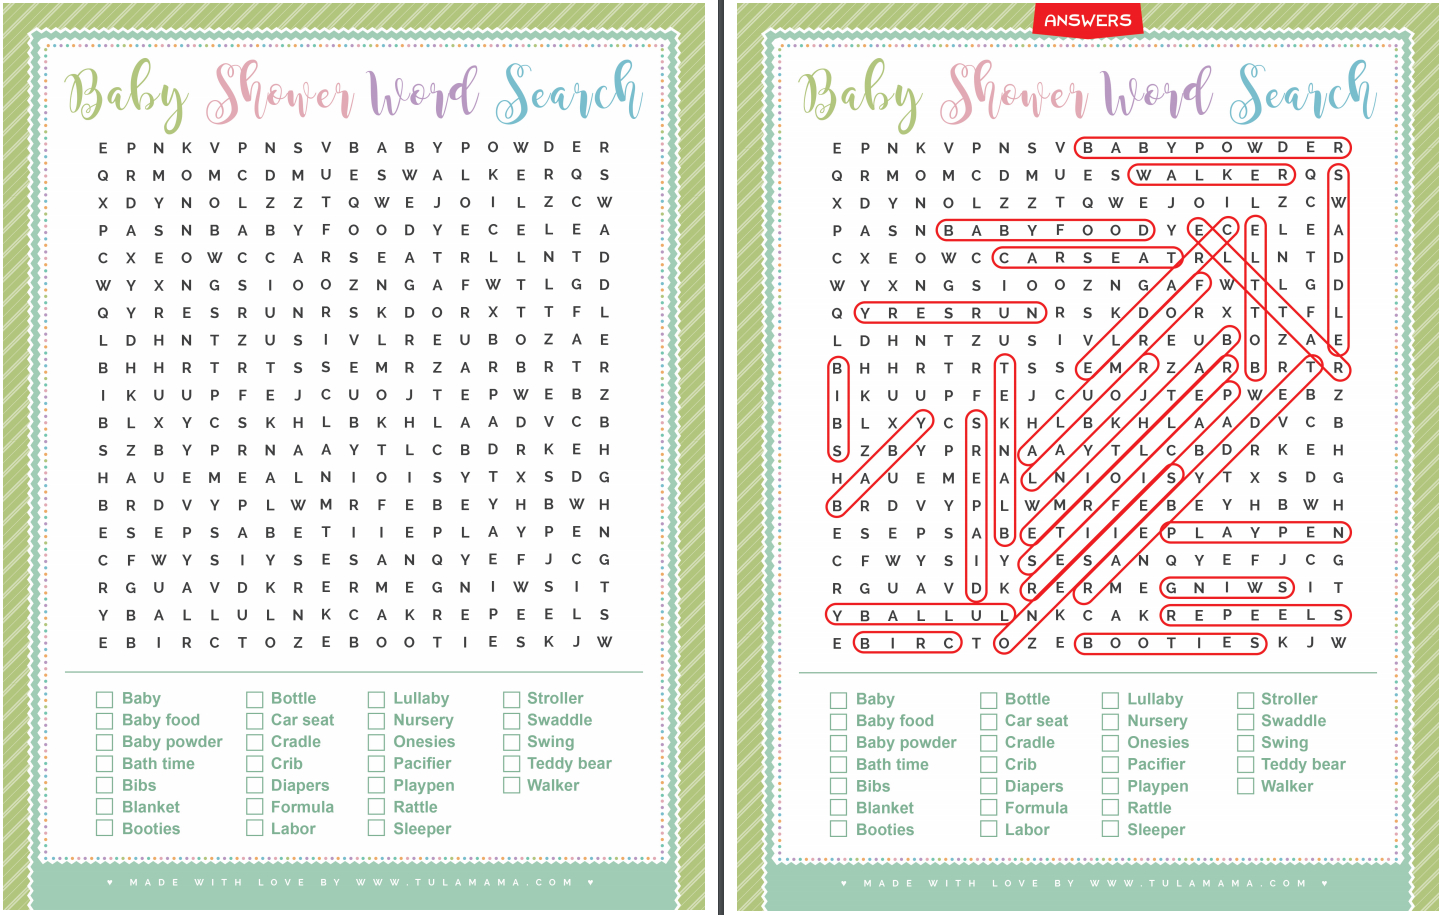 Baby Shower Word Search - A Top Ranked Baby Shower Game